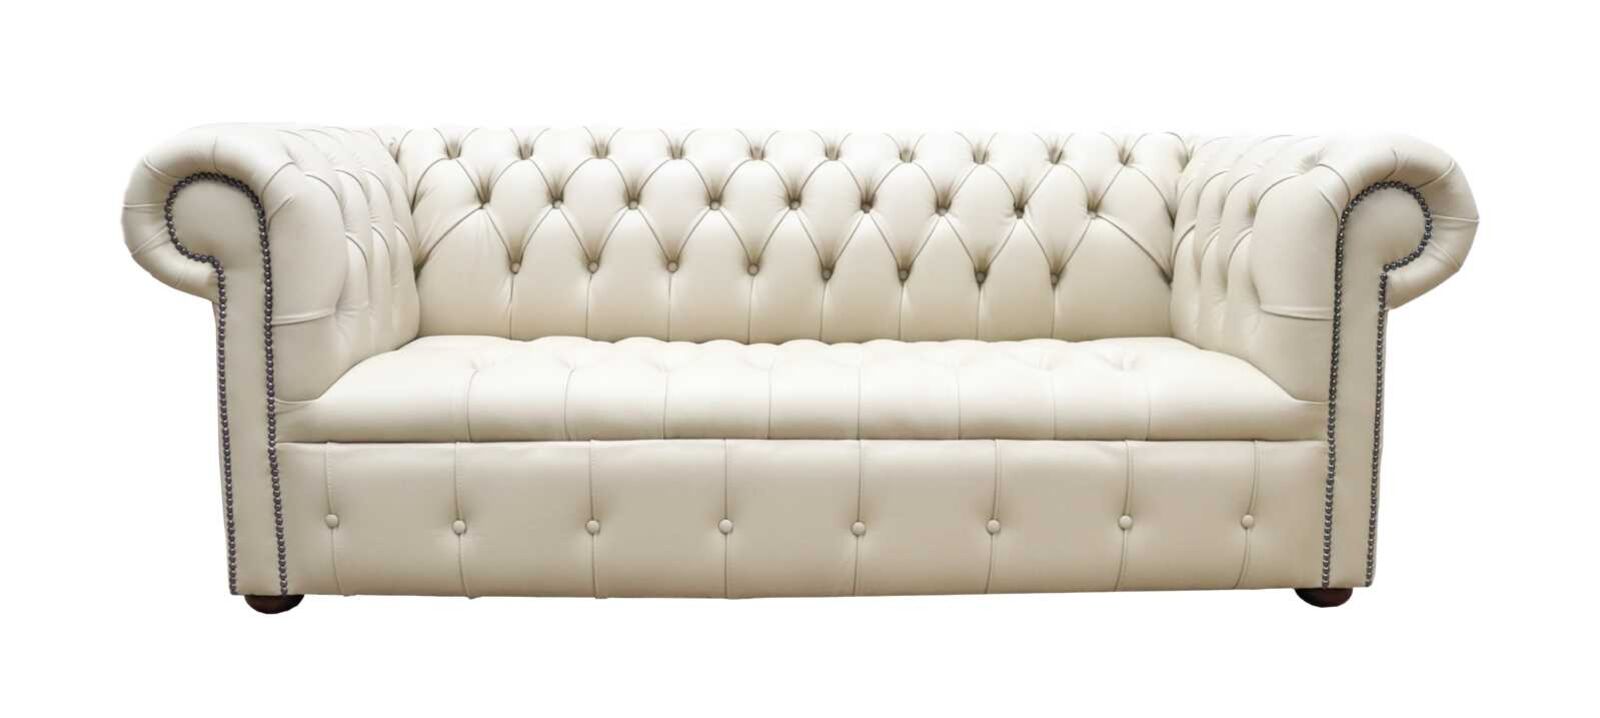 Product photograph of Chesterfield 3 Seater Sofa Settee Buttoned Seat Dark Beige Leather Sofa Offer from Designer Sofas 4U